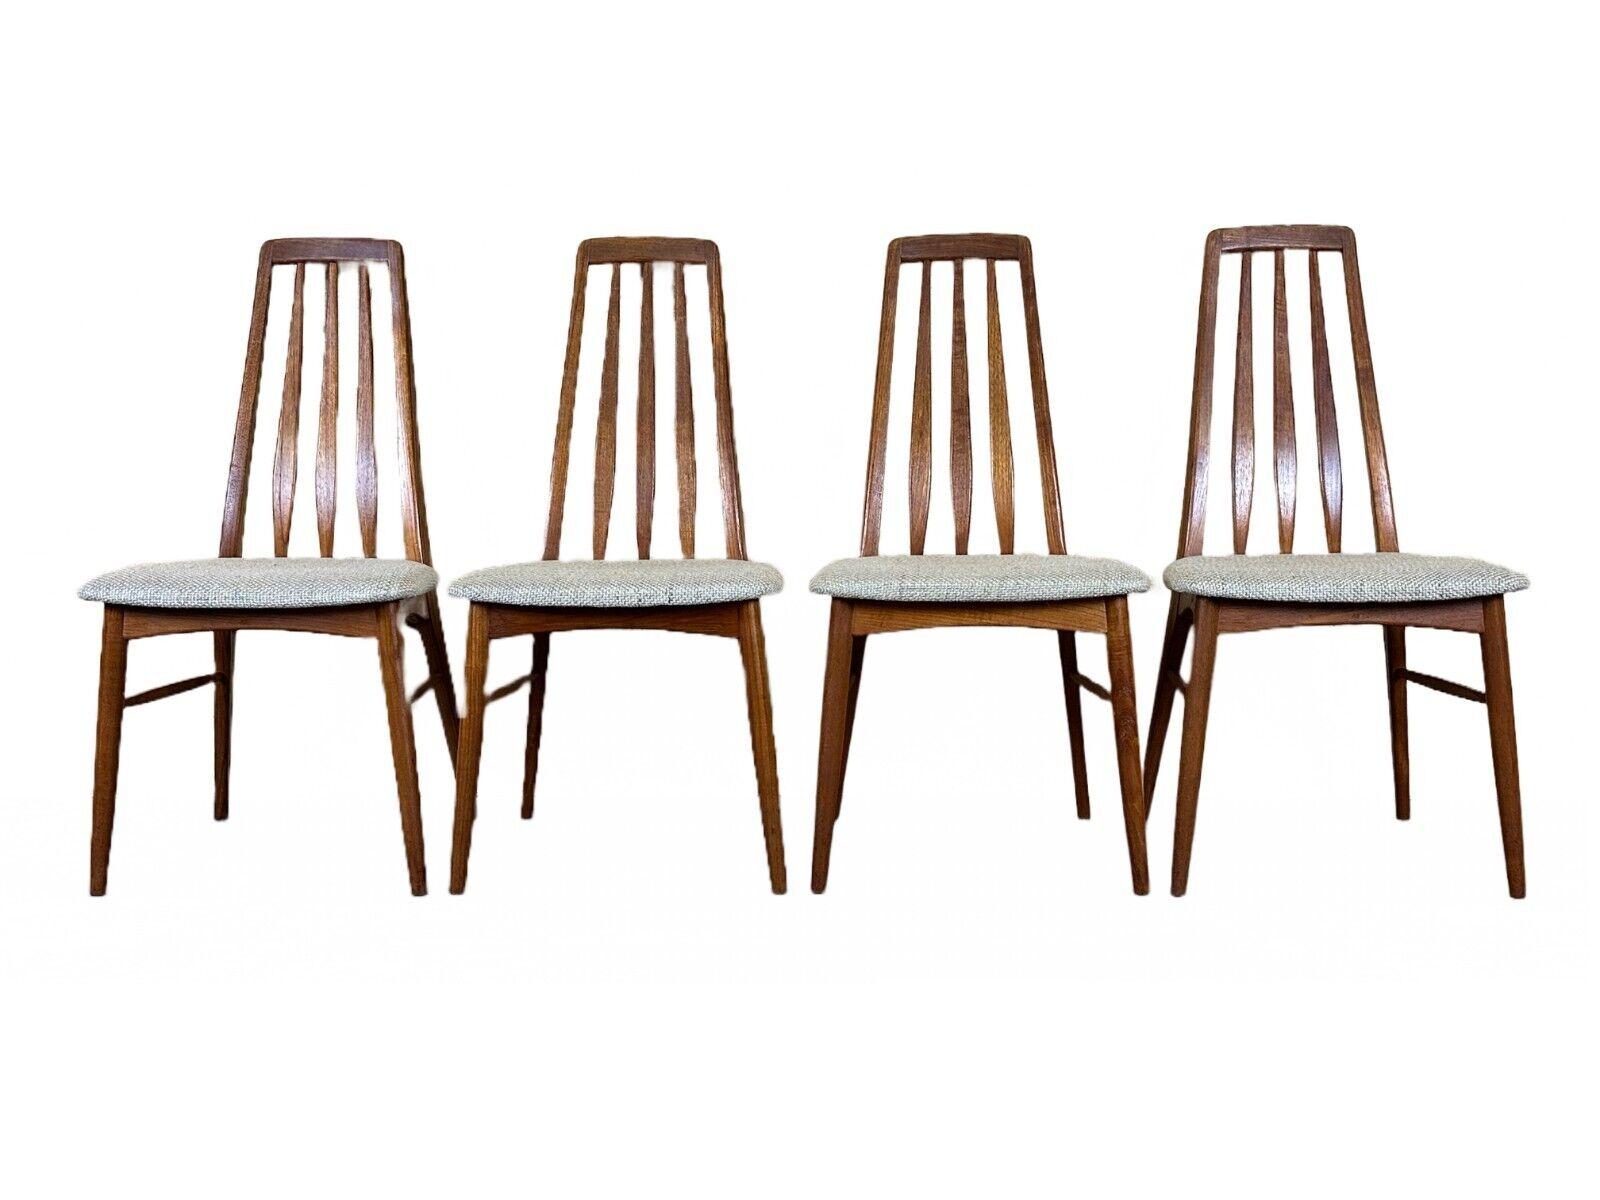 4x 60s 70s Eva teak chairs Dining Chair by Niels Koefoed for Hornslet

Object: 4x chair

Manufacturer: Hornslet

Condition: good

Age: around 1960-1970

Dimensions:

Width = 48cm
Depth = 52cm
Height = 96.5cm
Seat height = 45cm

Other notes:

The